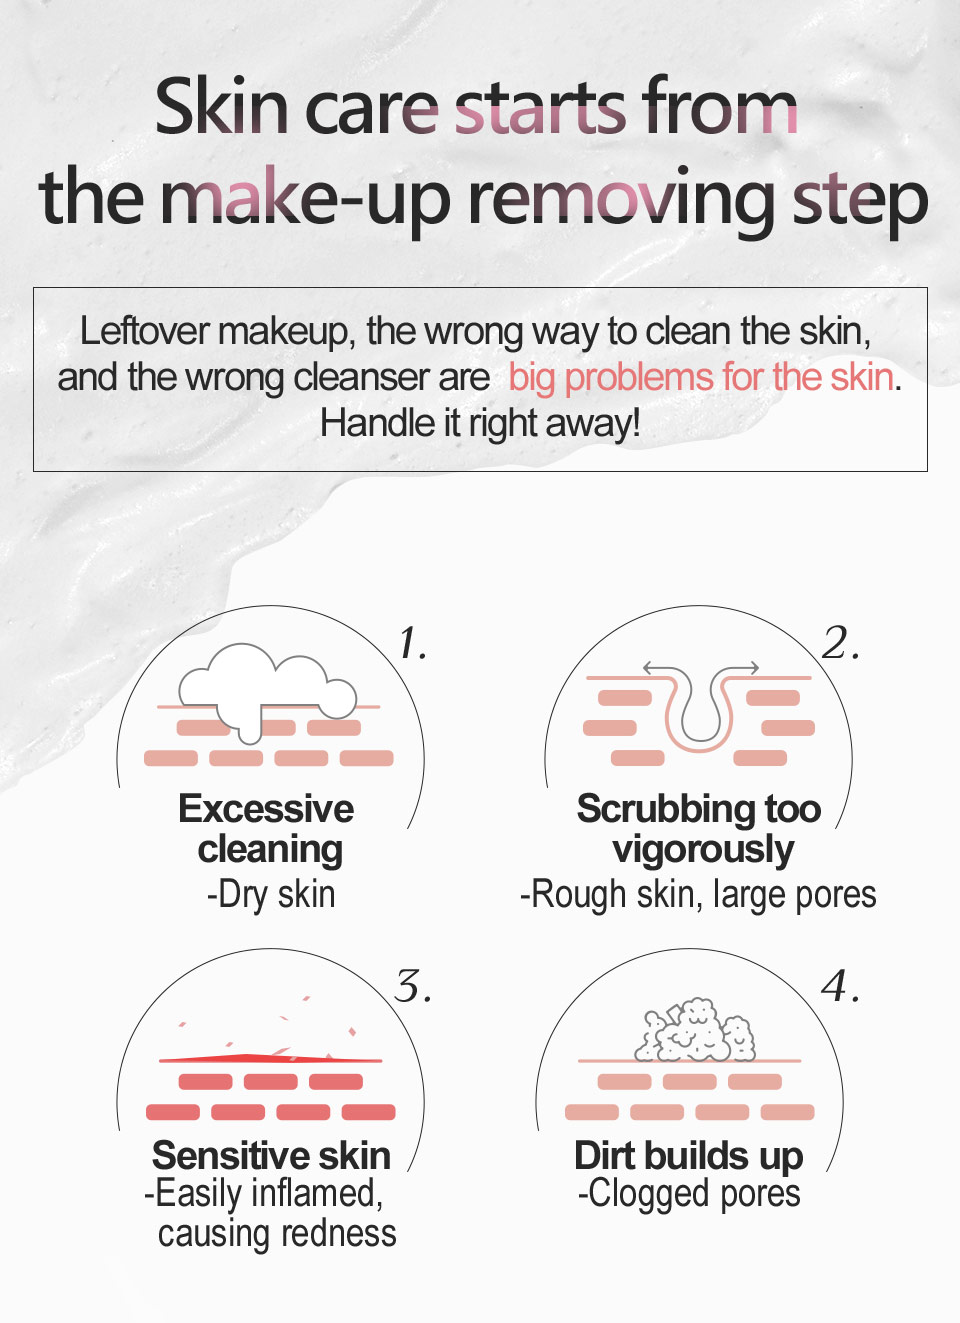 Good skin starts with a thorough cleanse. Makeup removal should be part of your must-do daily skin care ritual.